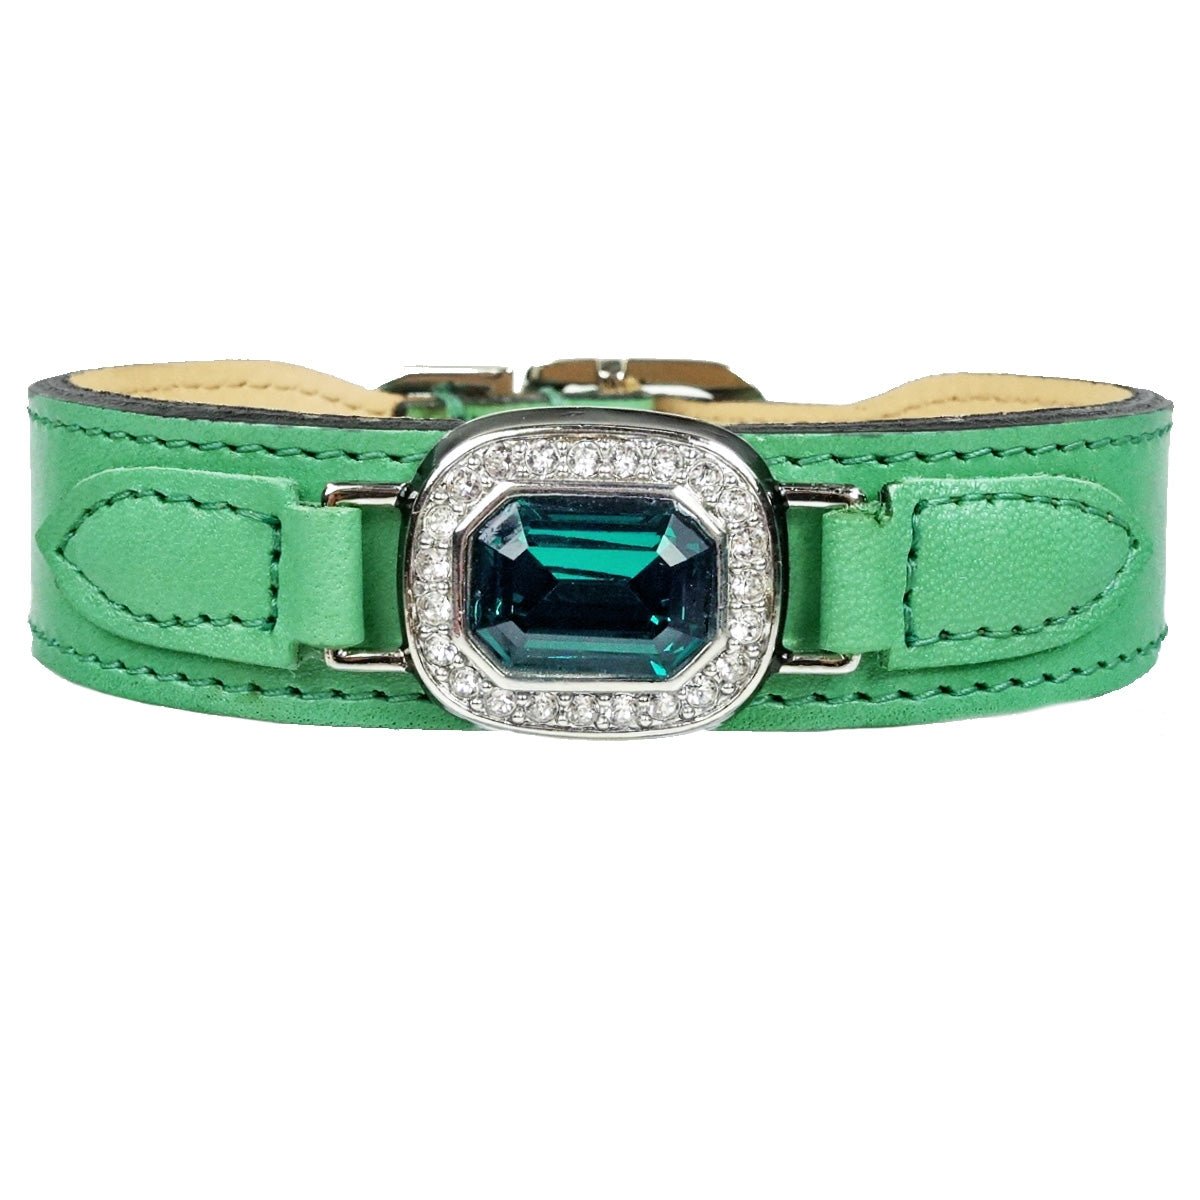 Haute Couture Octagon in Kelly Green, Emerald & Nickel